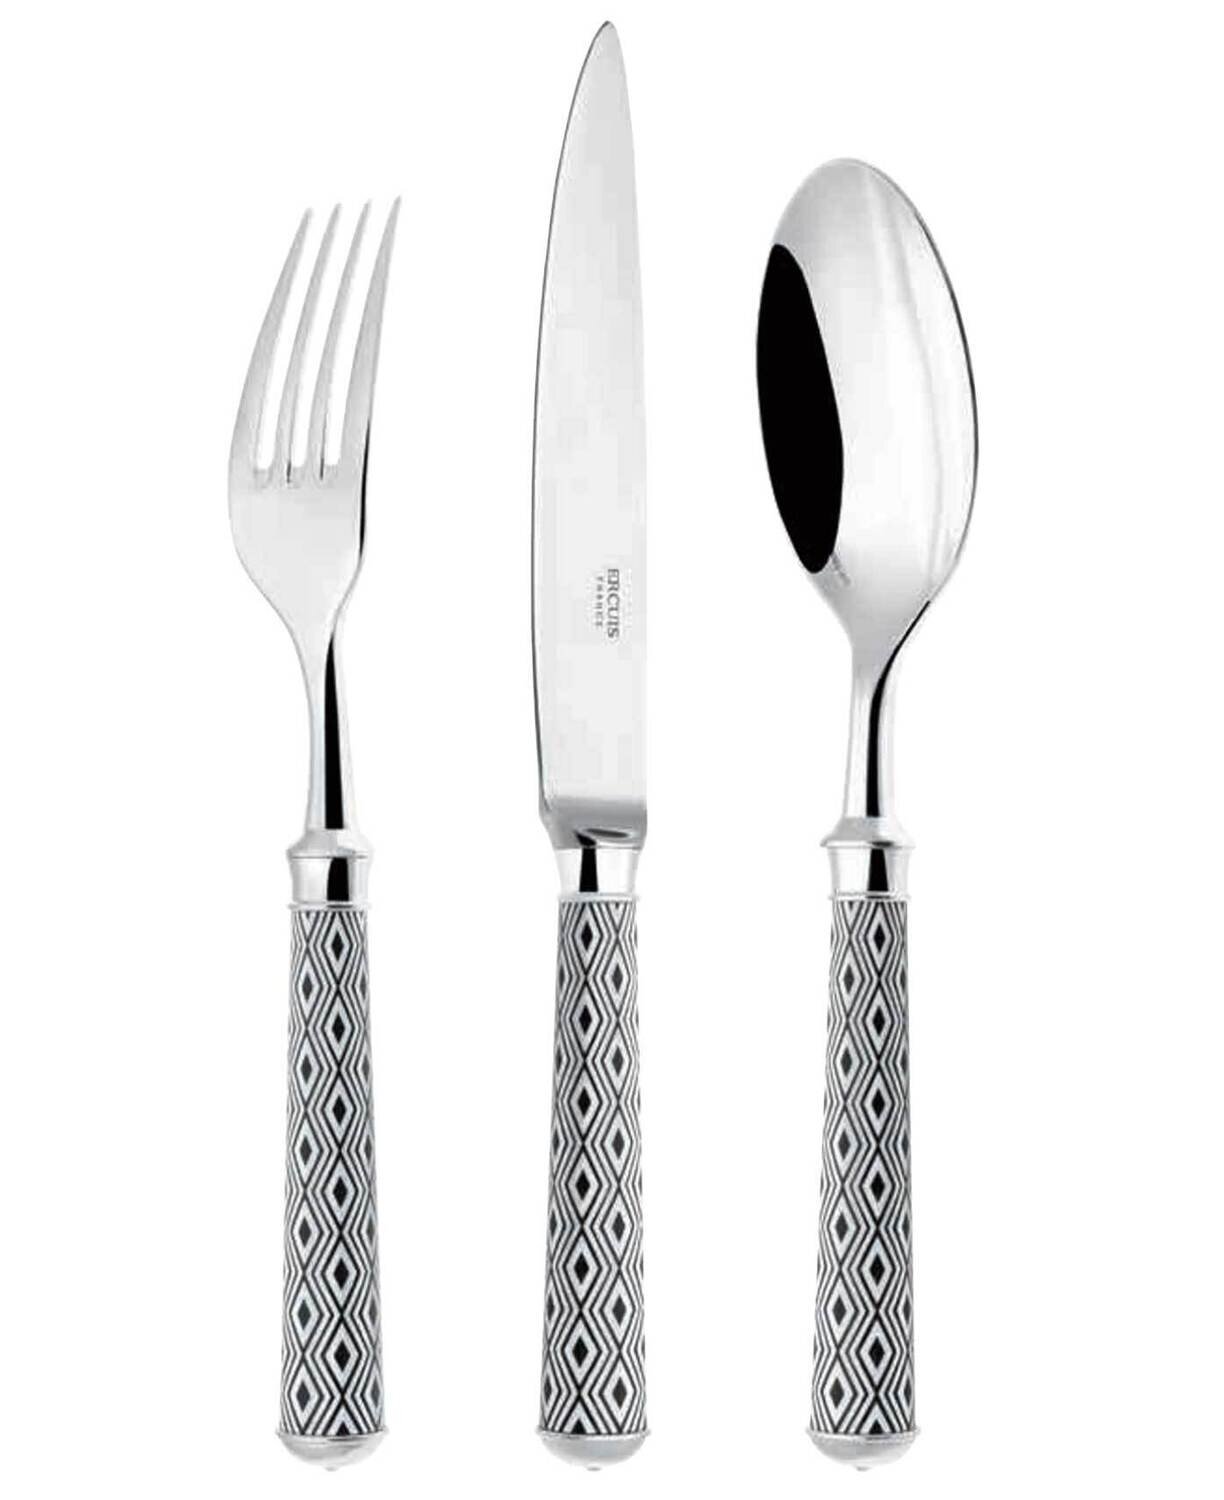 Ercuis Arlequin Grey Carving Fork 10 Inch Silver Plated F600545-45